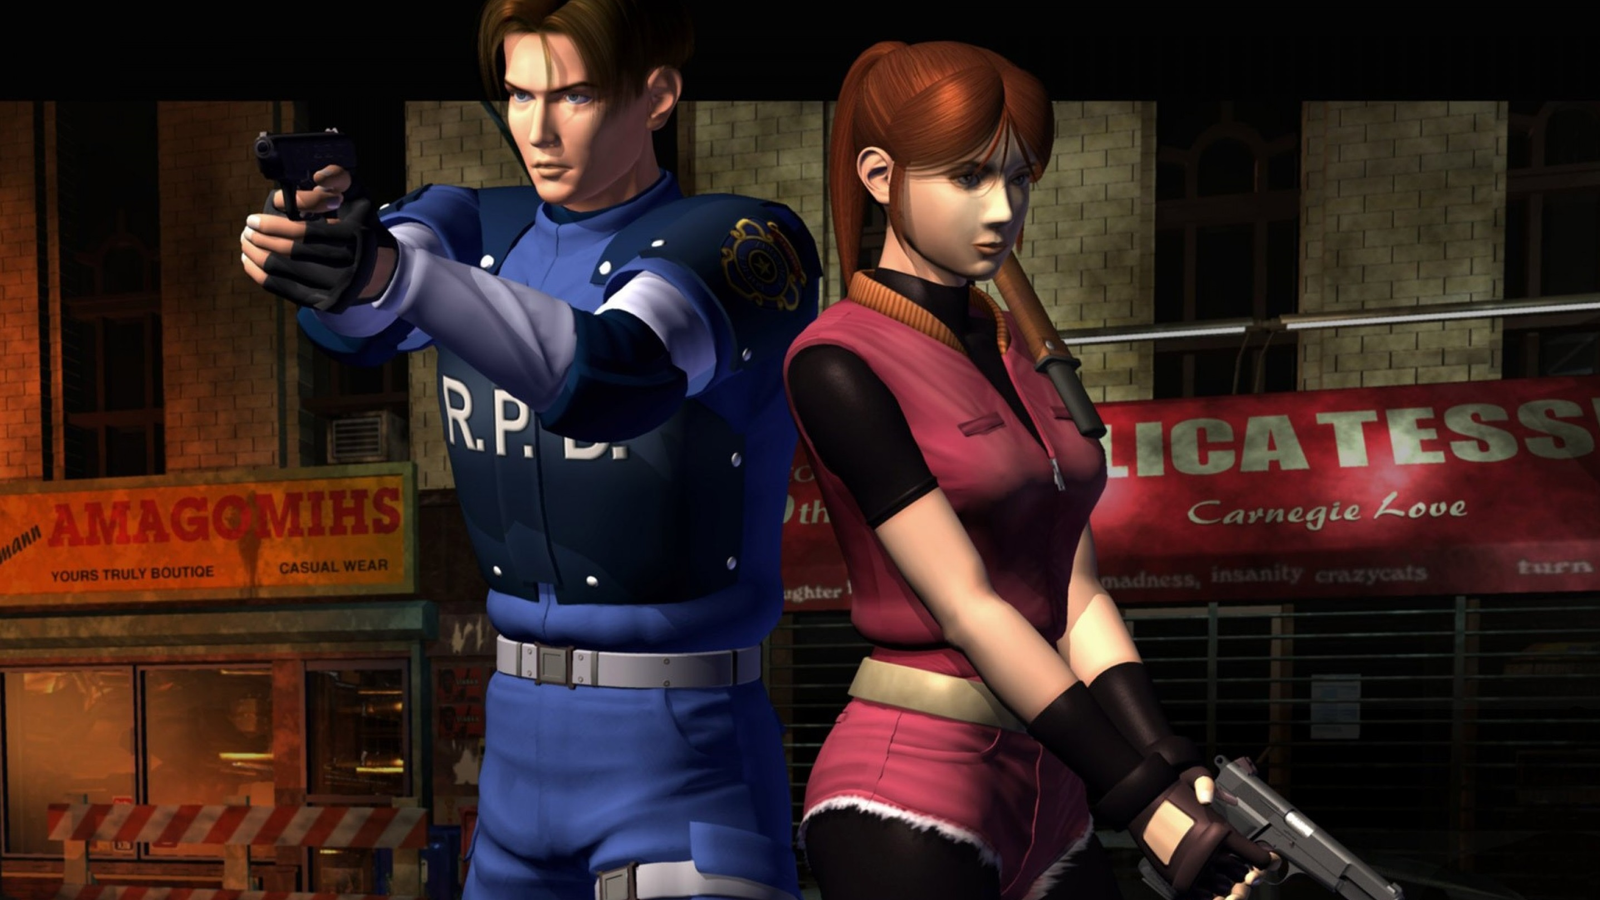 Resident Evil 2 review -- Too much fun to be scared